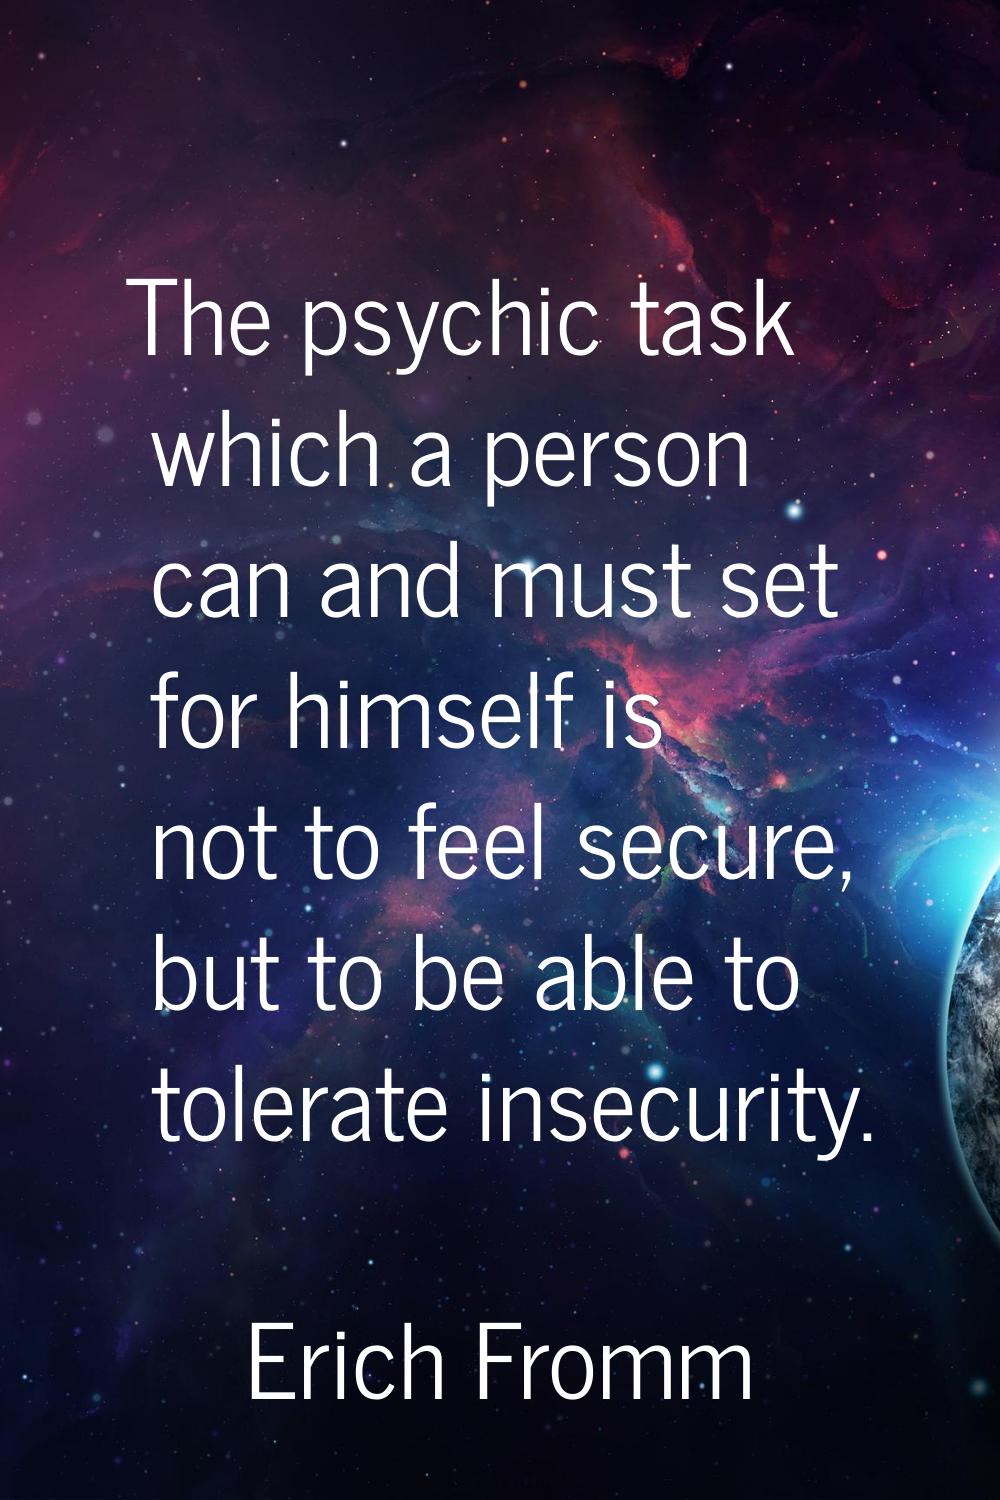 The psychic task which a person can and must set for himself is not to feel secure, but to be able 